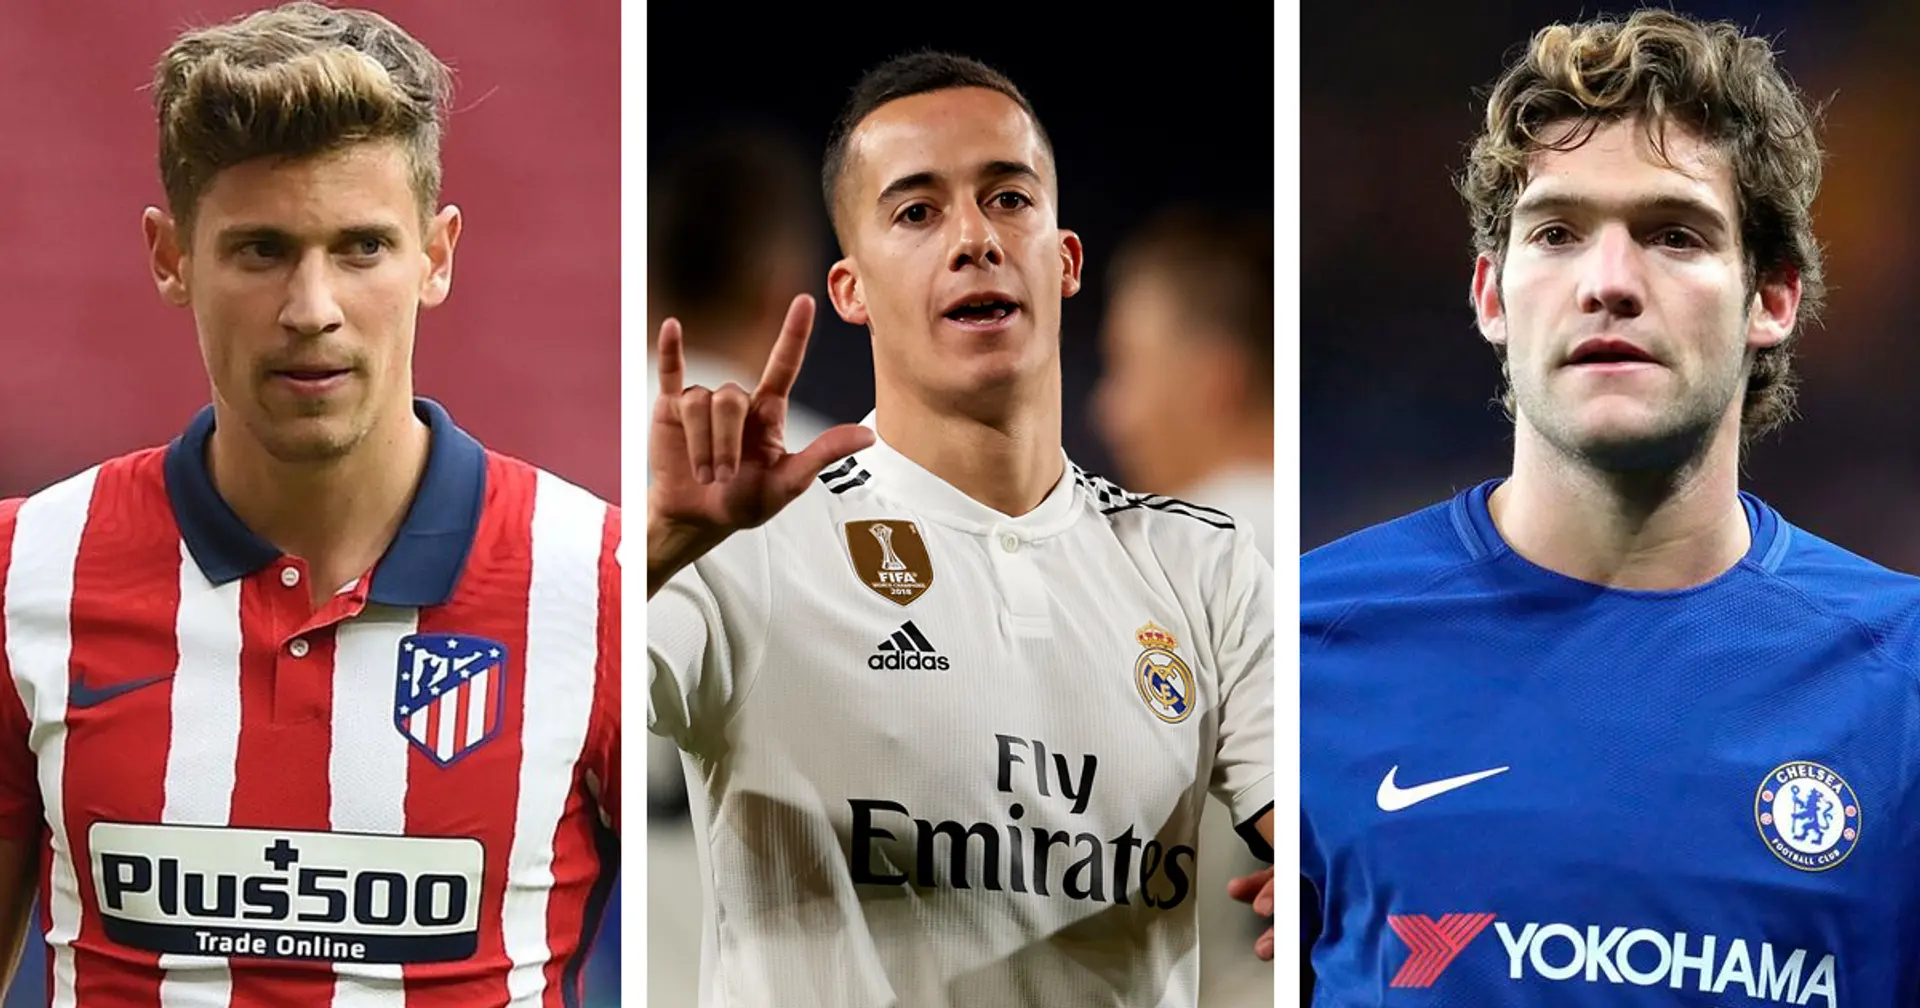 44 Real Madrid Academy graduates play in Europe's top 5 leagues